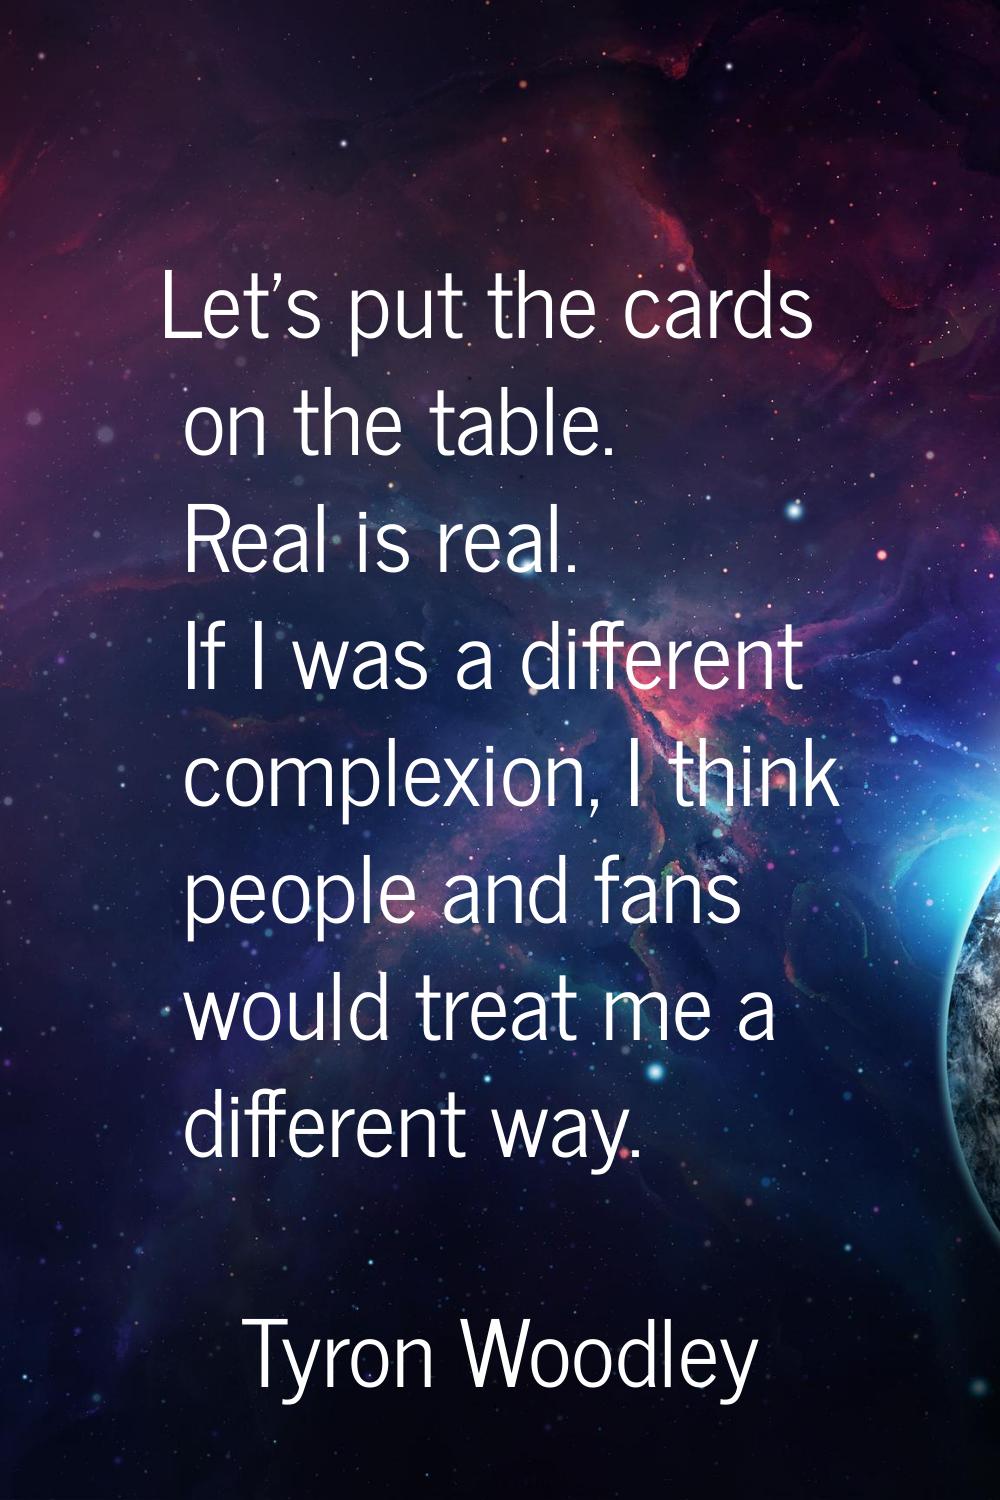 Let's put the cards on the table. Real is real. If I was a different complexion, I think people and